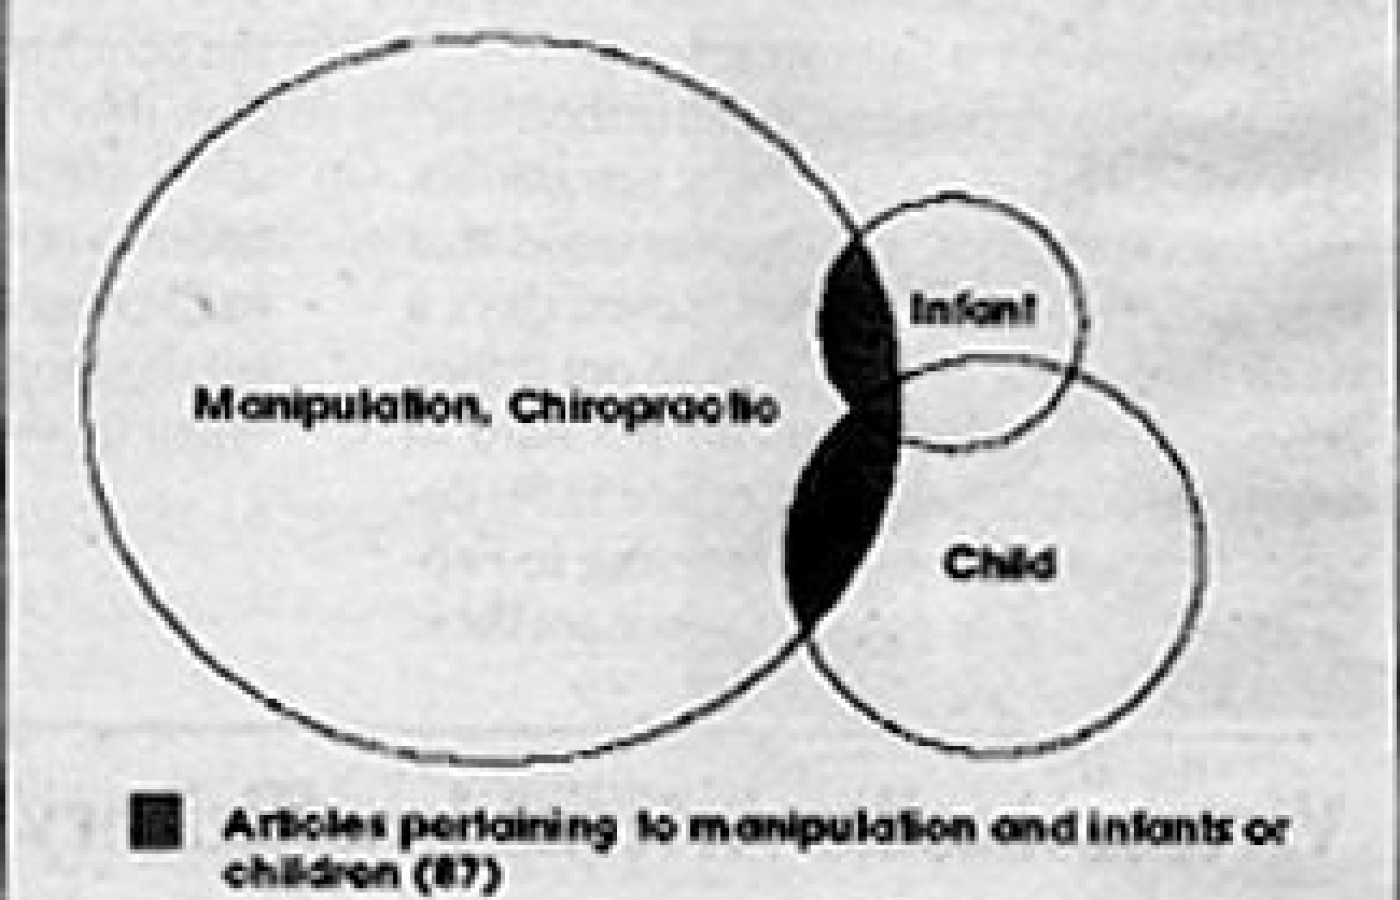 Venn Diagram of Manipulation and Chiropractic as they relate to Infants and Children